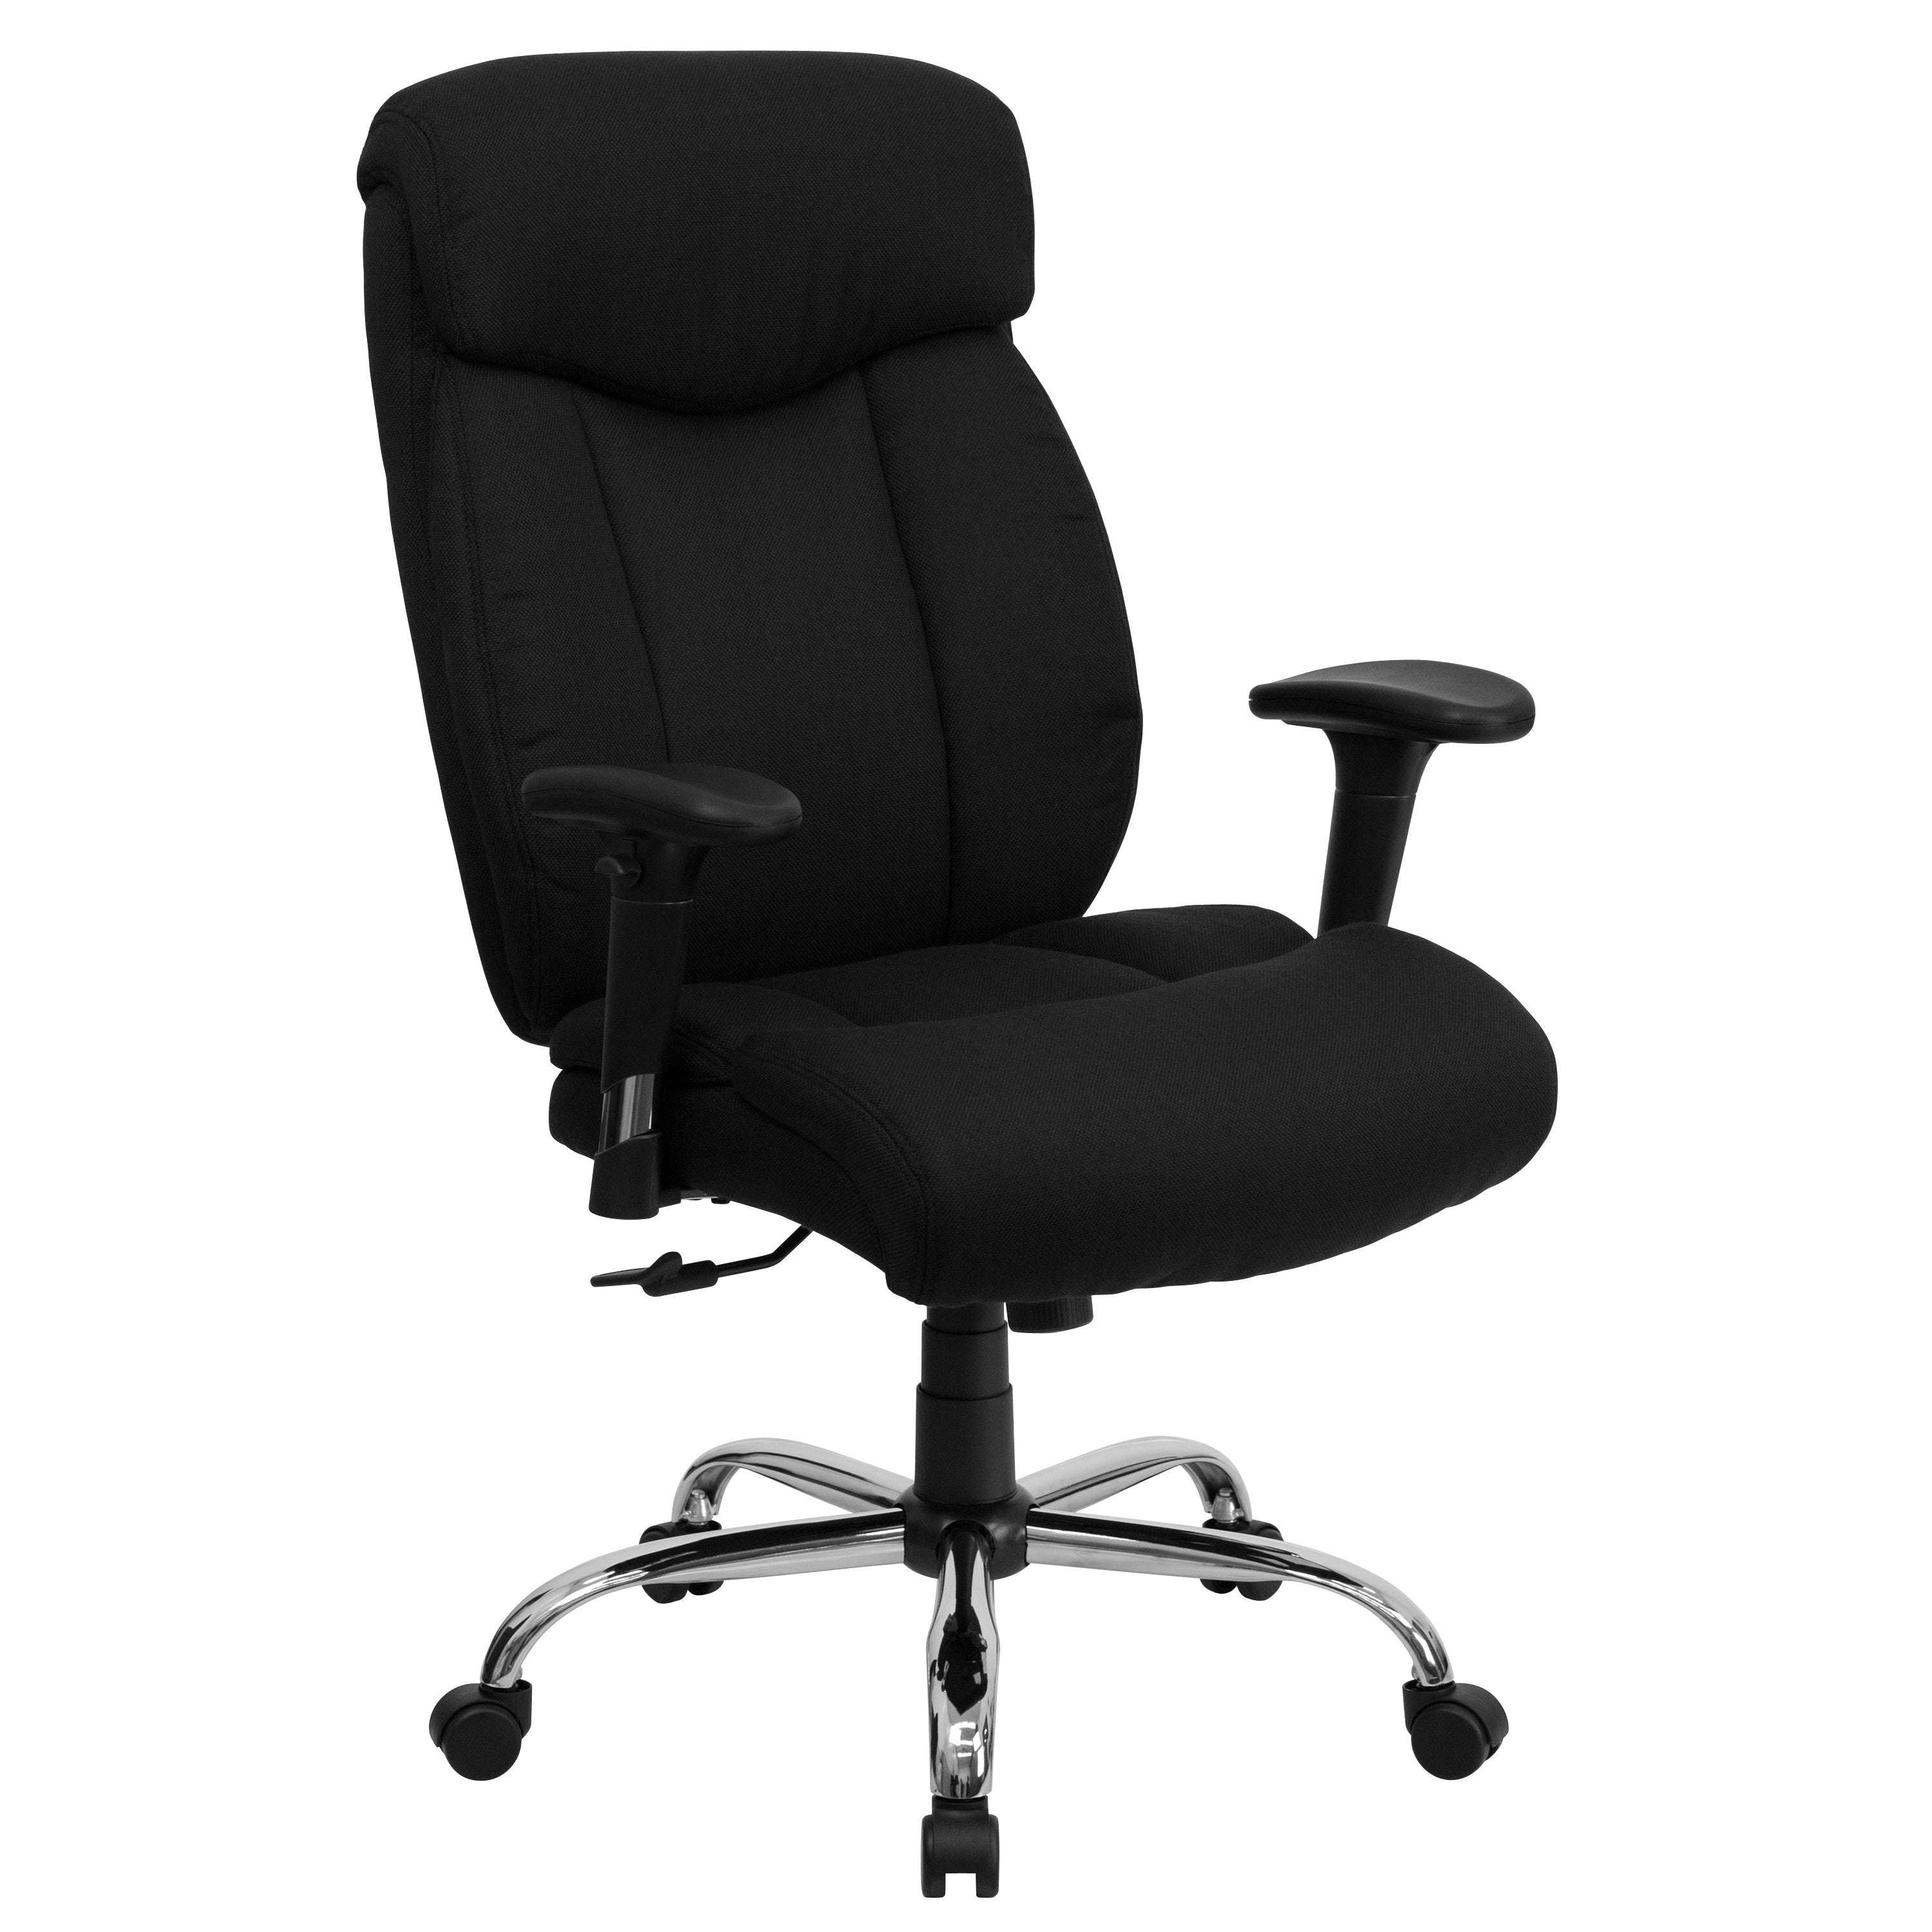 HERCULES Series Big & Tall 400 lb. Rated High Back Executive Swivel Ergonomic Office Chair with Full Headrest and Adjustable Arms-Big & Tall Office Chair-Flash Furniture-Wall2Wall Furnishings